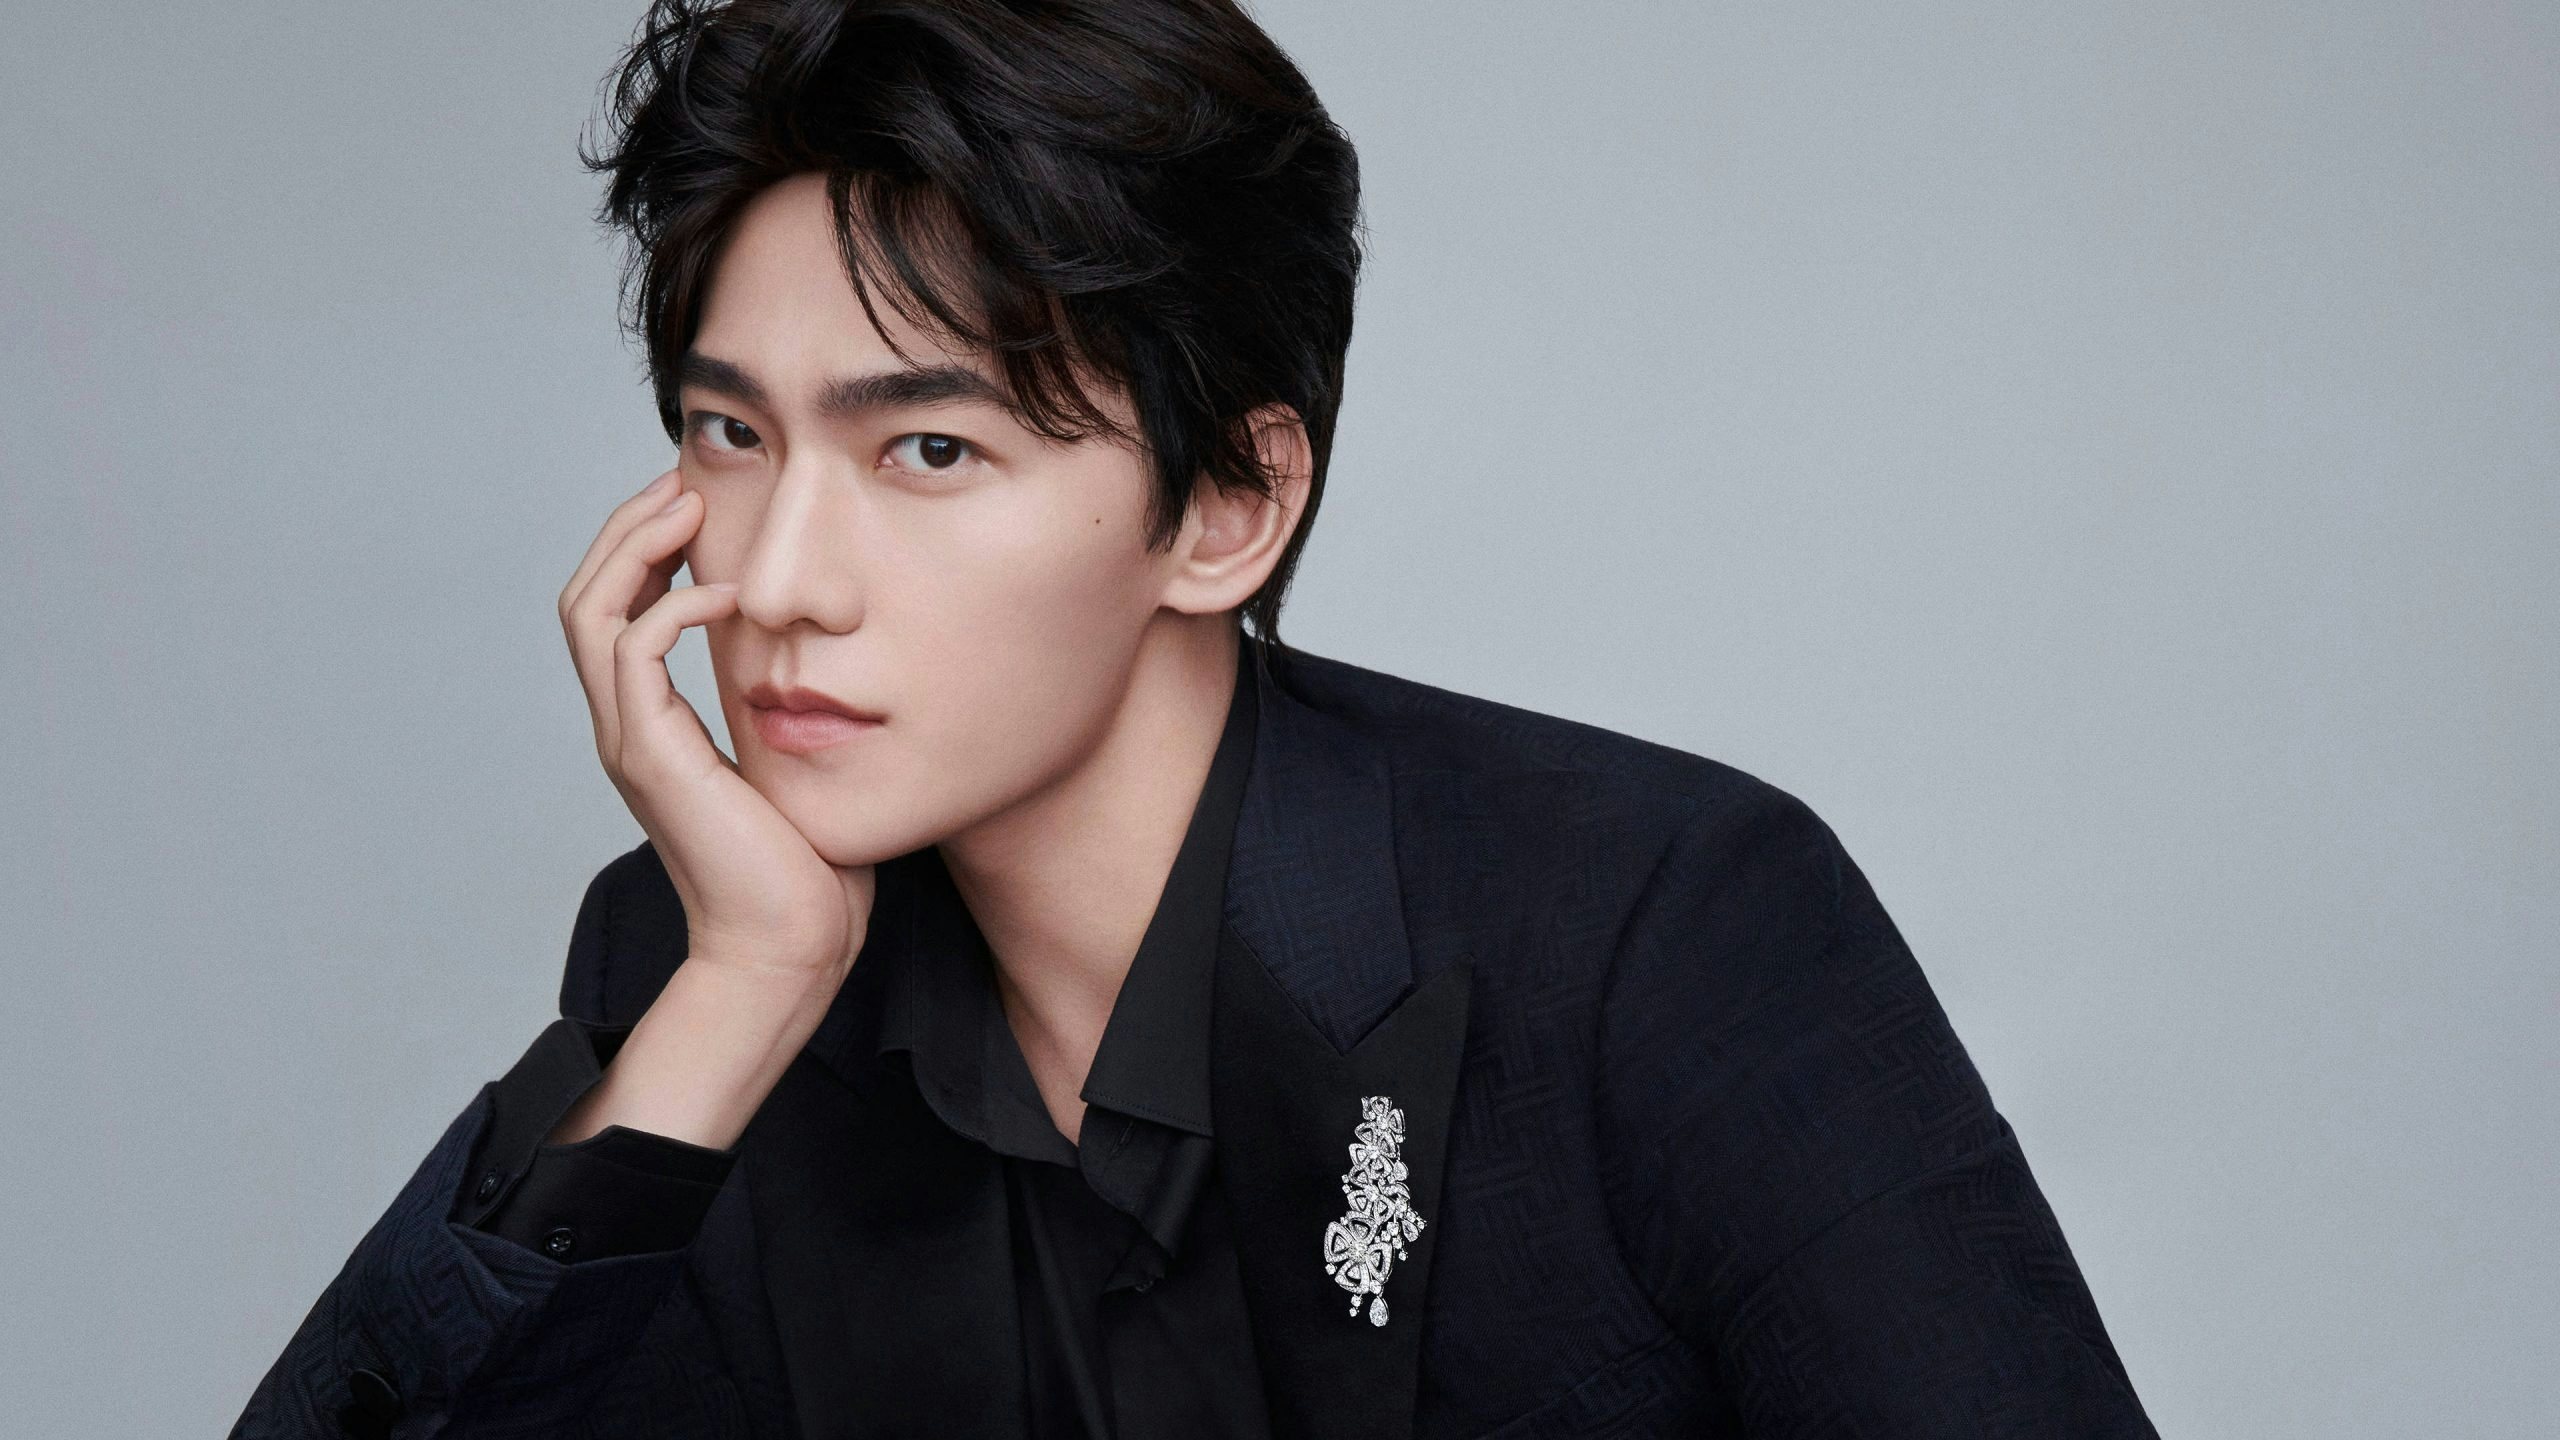 After severing ties with scandal-ridden Kris Wu, Bulgari has appointed Chinese actor Yang Yang as its new spokesperson. Photo: Bulgari